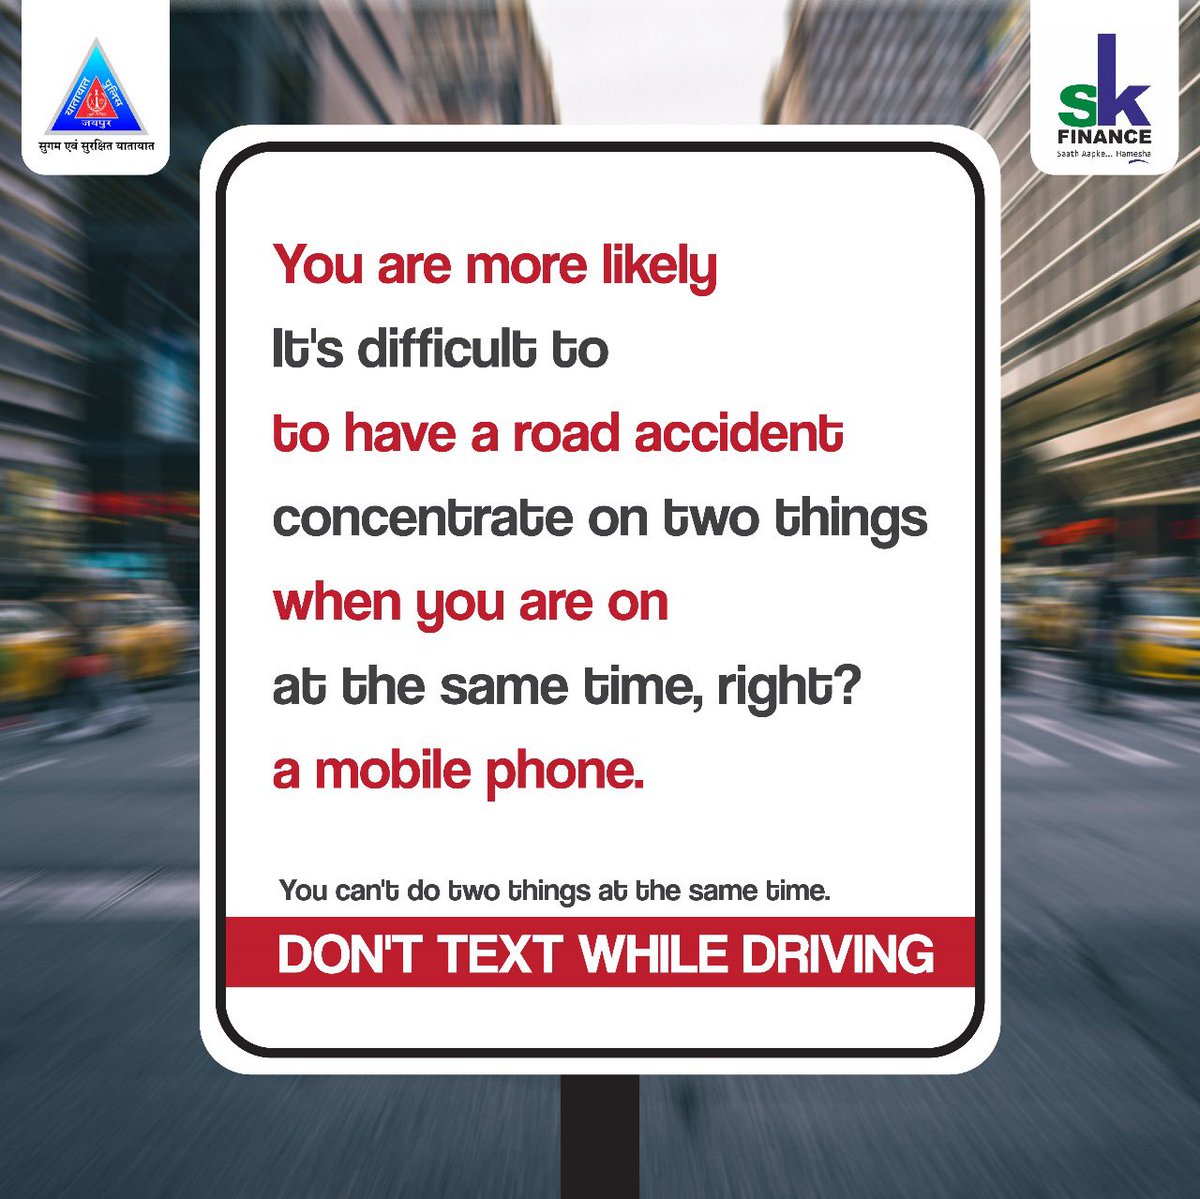 Split attention leads to split-second tragedies. Drive distraction-free.

Put the phone down while driving. 📵

#BeResponsible #DontTextWhileDriving #JaipurTrafficPolice #DriveSafely #SafetyFirst #FollowTrafficRules